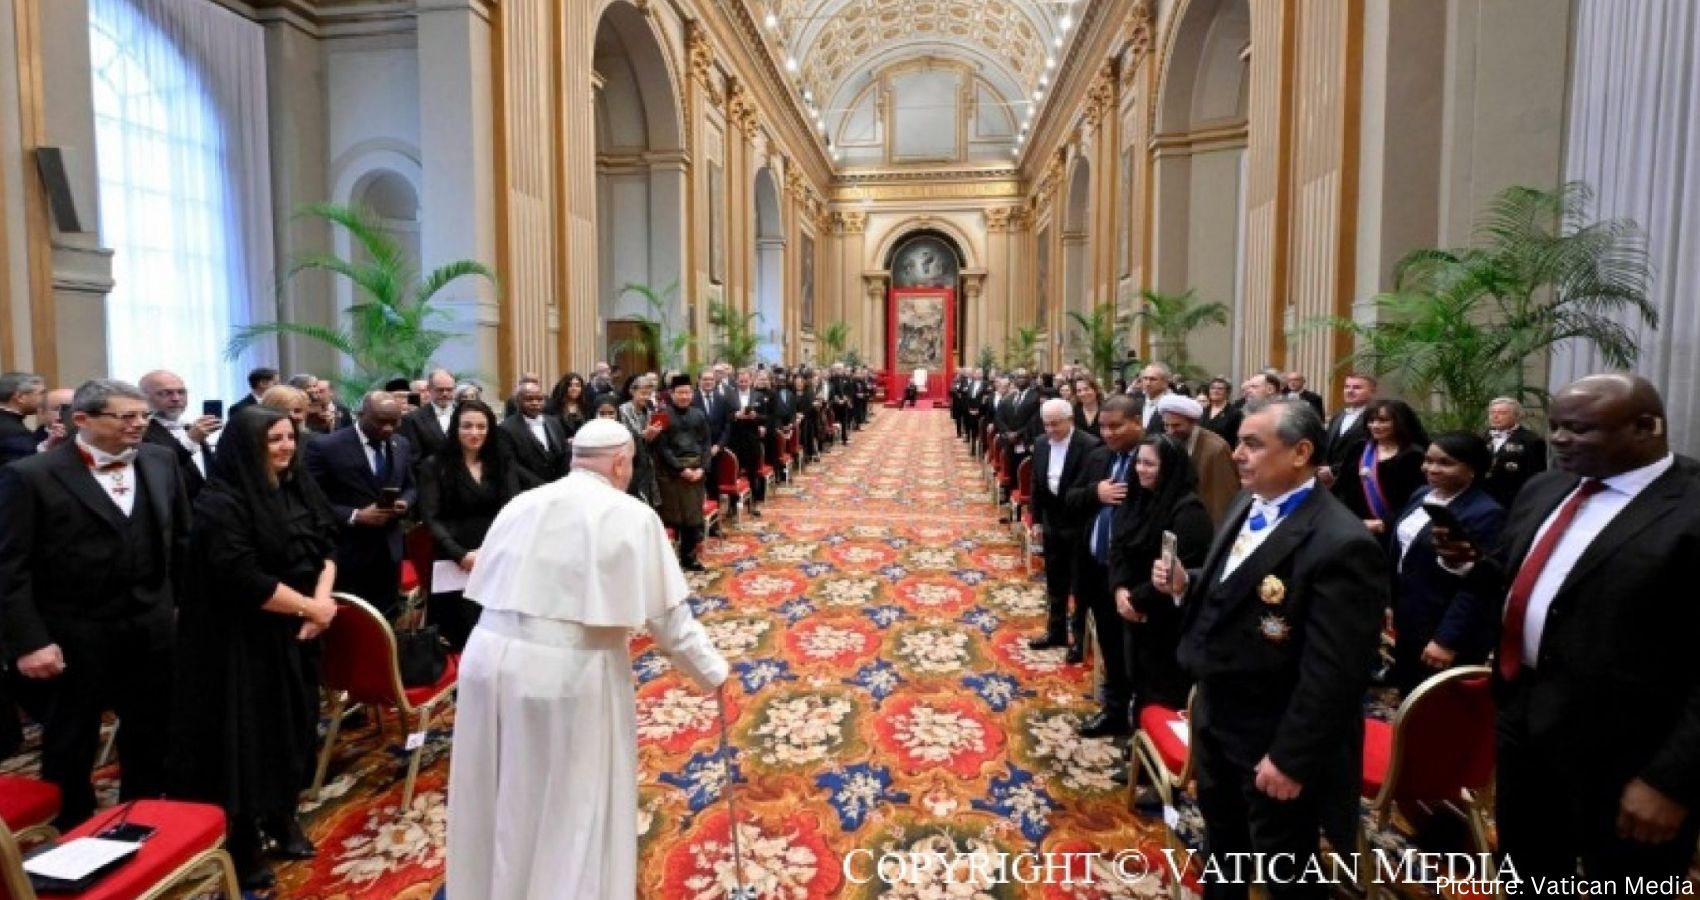 Holy See’s Global Diplomatic Network Flourishes: Establishes New Ties, Ratifies Agreements, and Navigates a Robust International Landscape